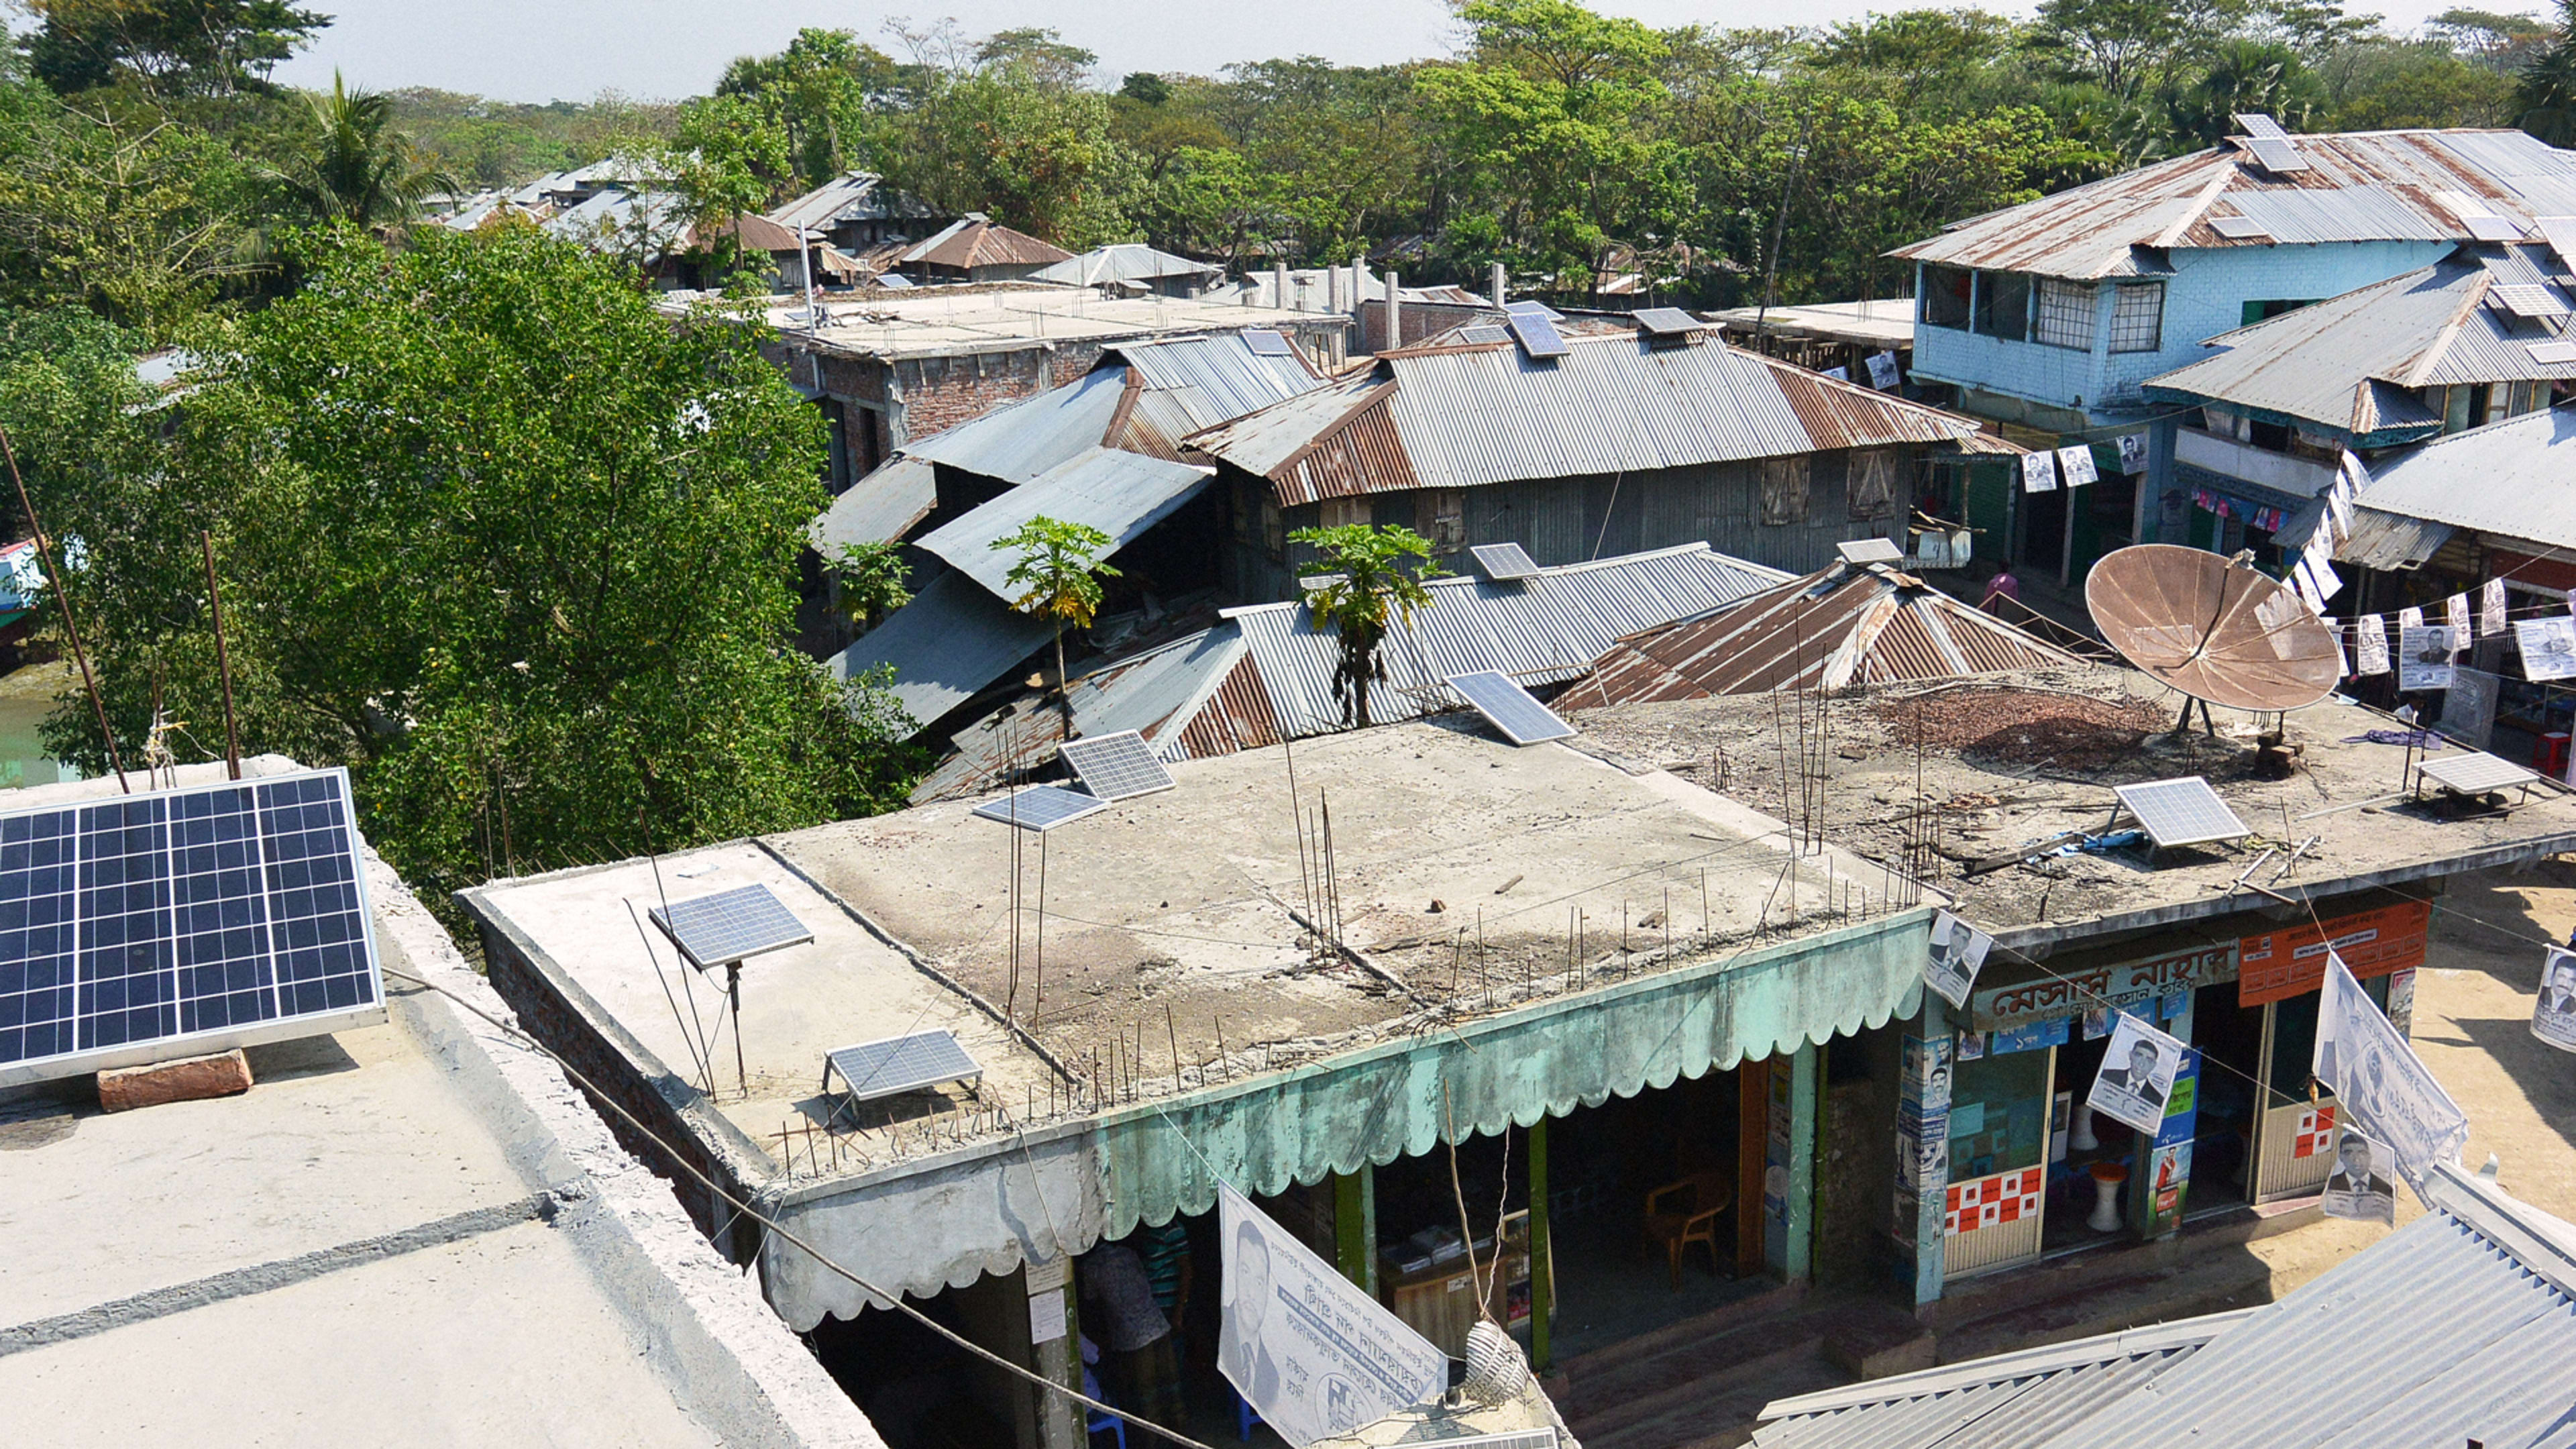 This startup lets villagers create mini power grids for their neighbors